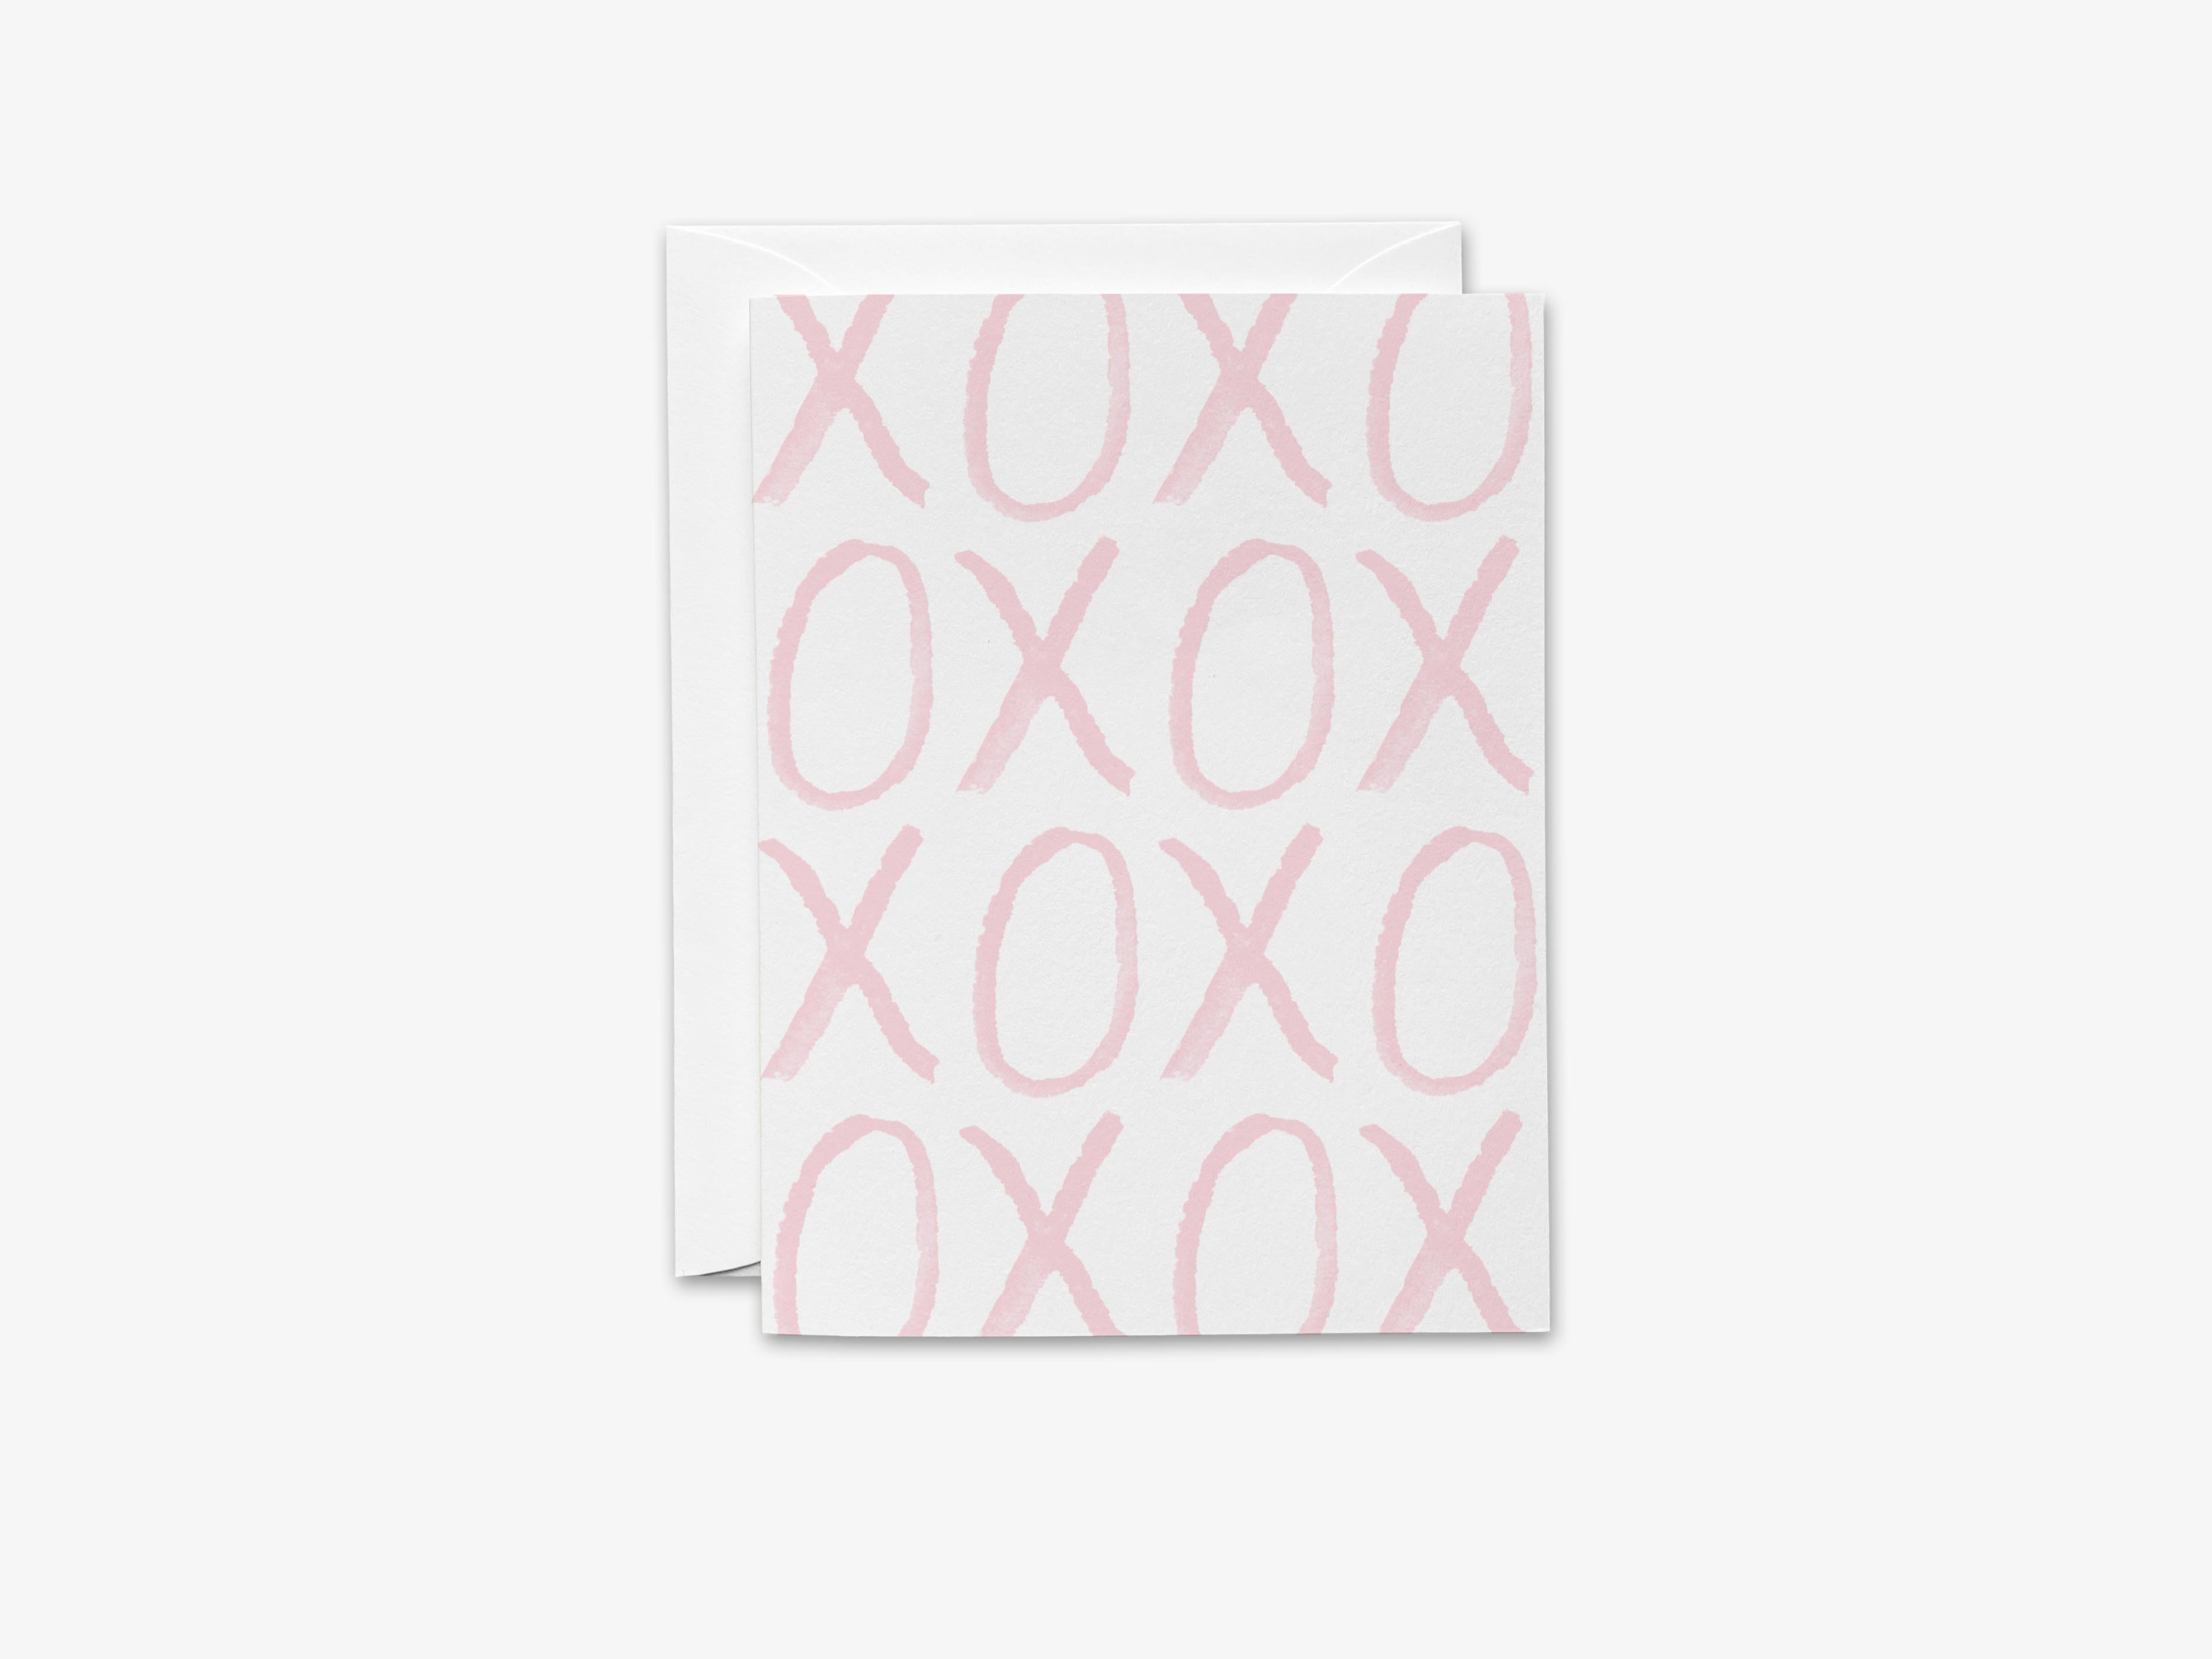 XOXO Pink Bold Greeting Card-These folded cards are 4.25x5.5 and feature our hand-painted watercolor xoxo, printed in the USA on 100lb textured stock. They come with a White envelope and make a great card for the special one in your life.-The Singing Little Bird